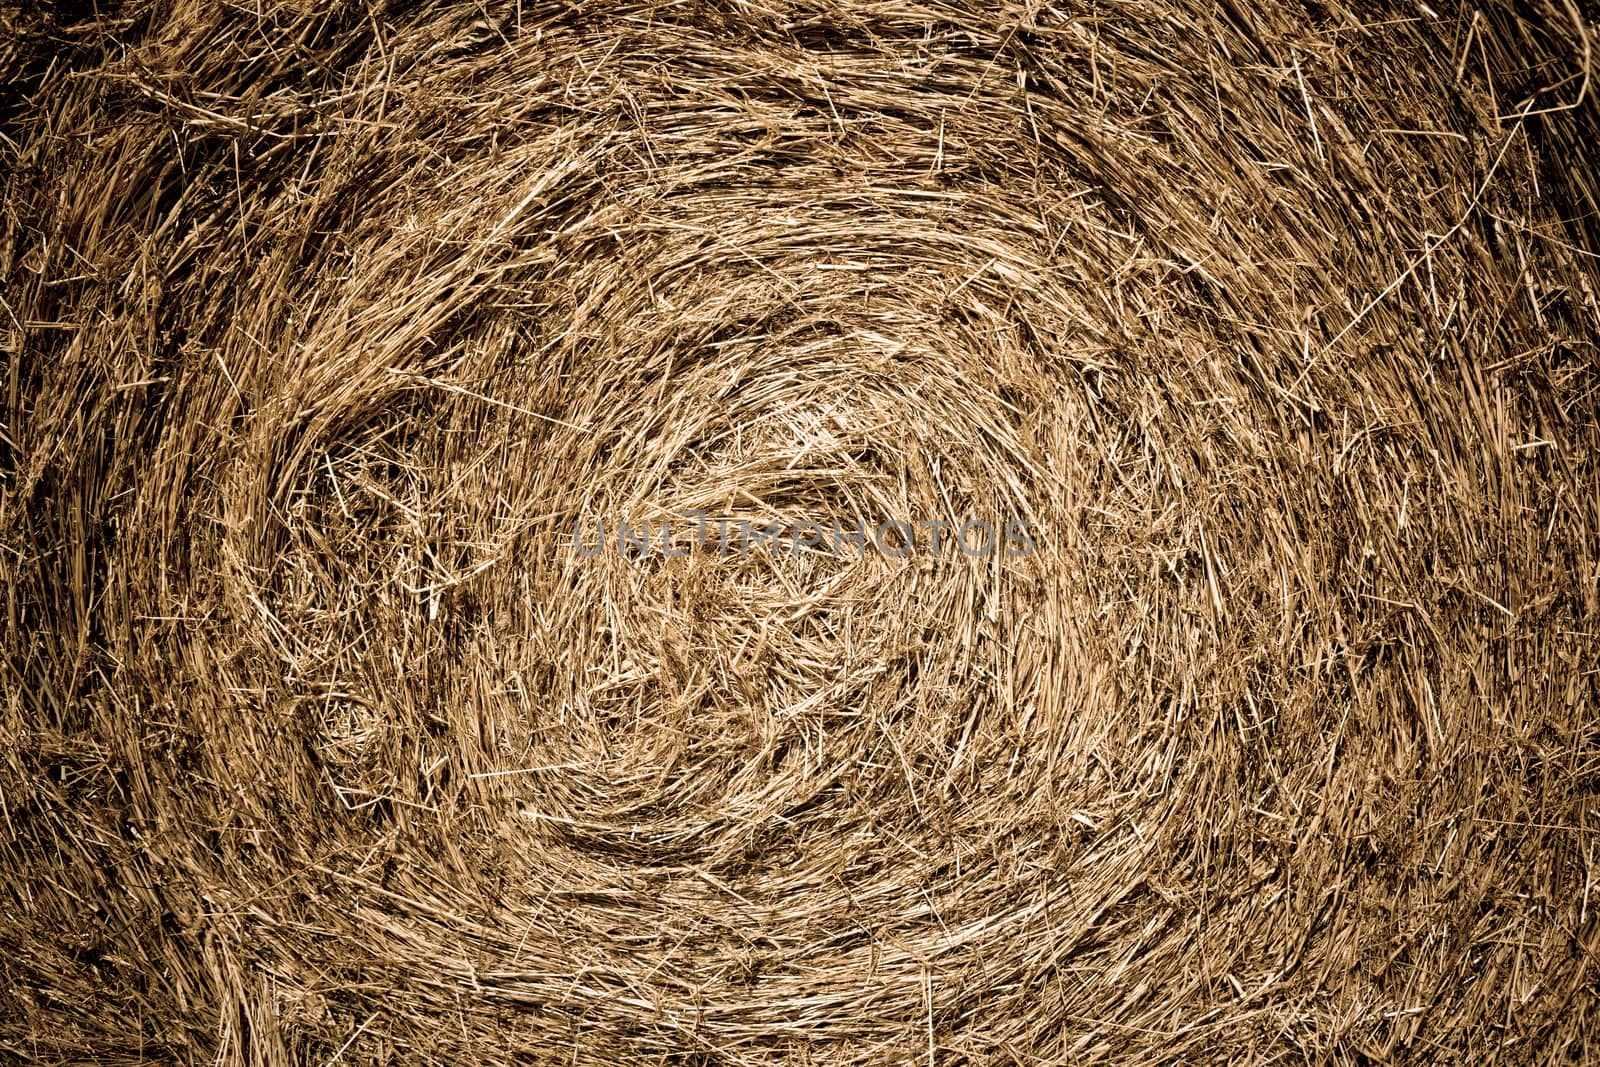 Close up shot of the centre of a haystack that could be used for backgrounds.